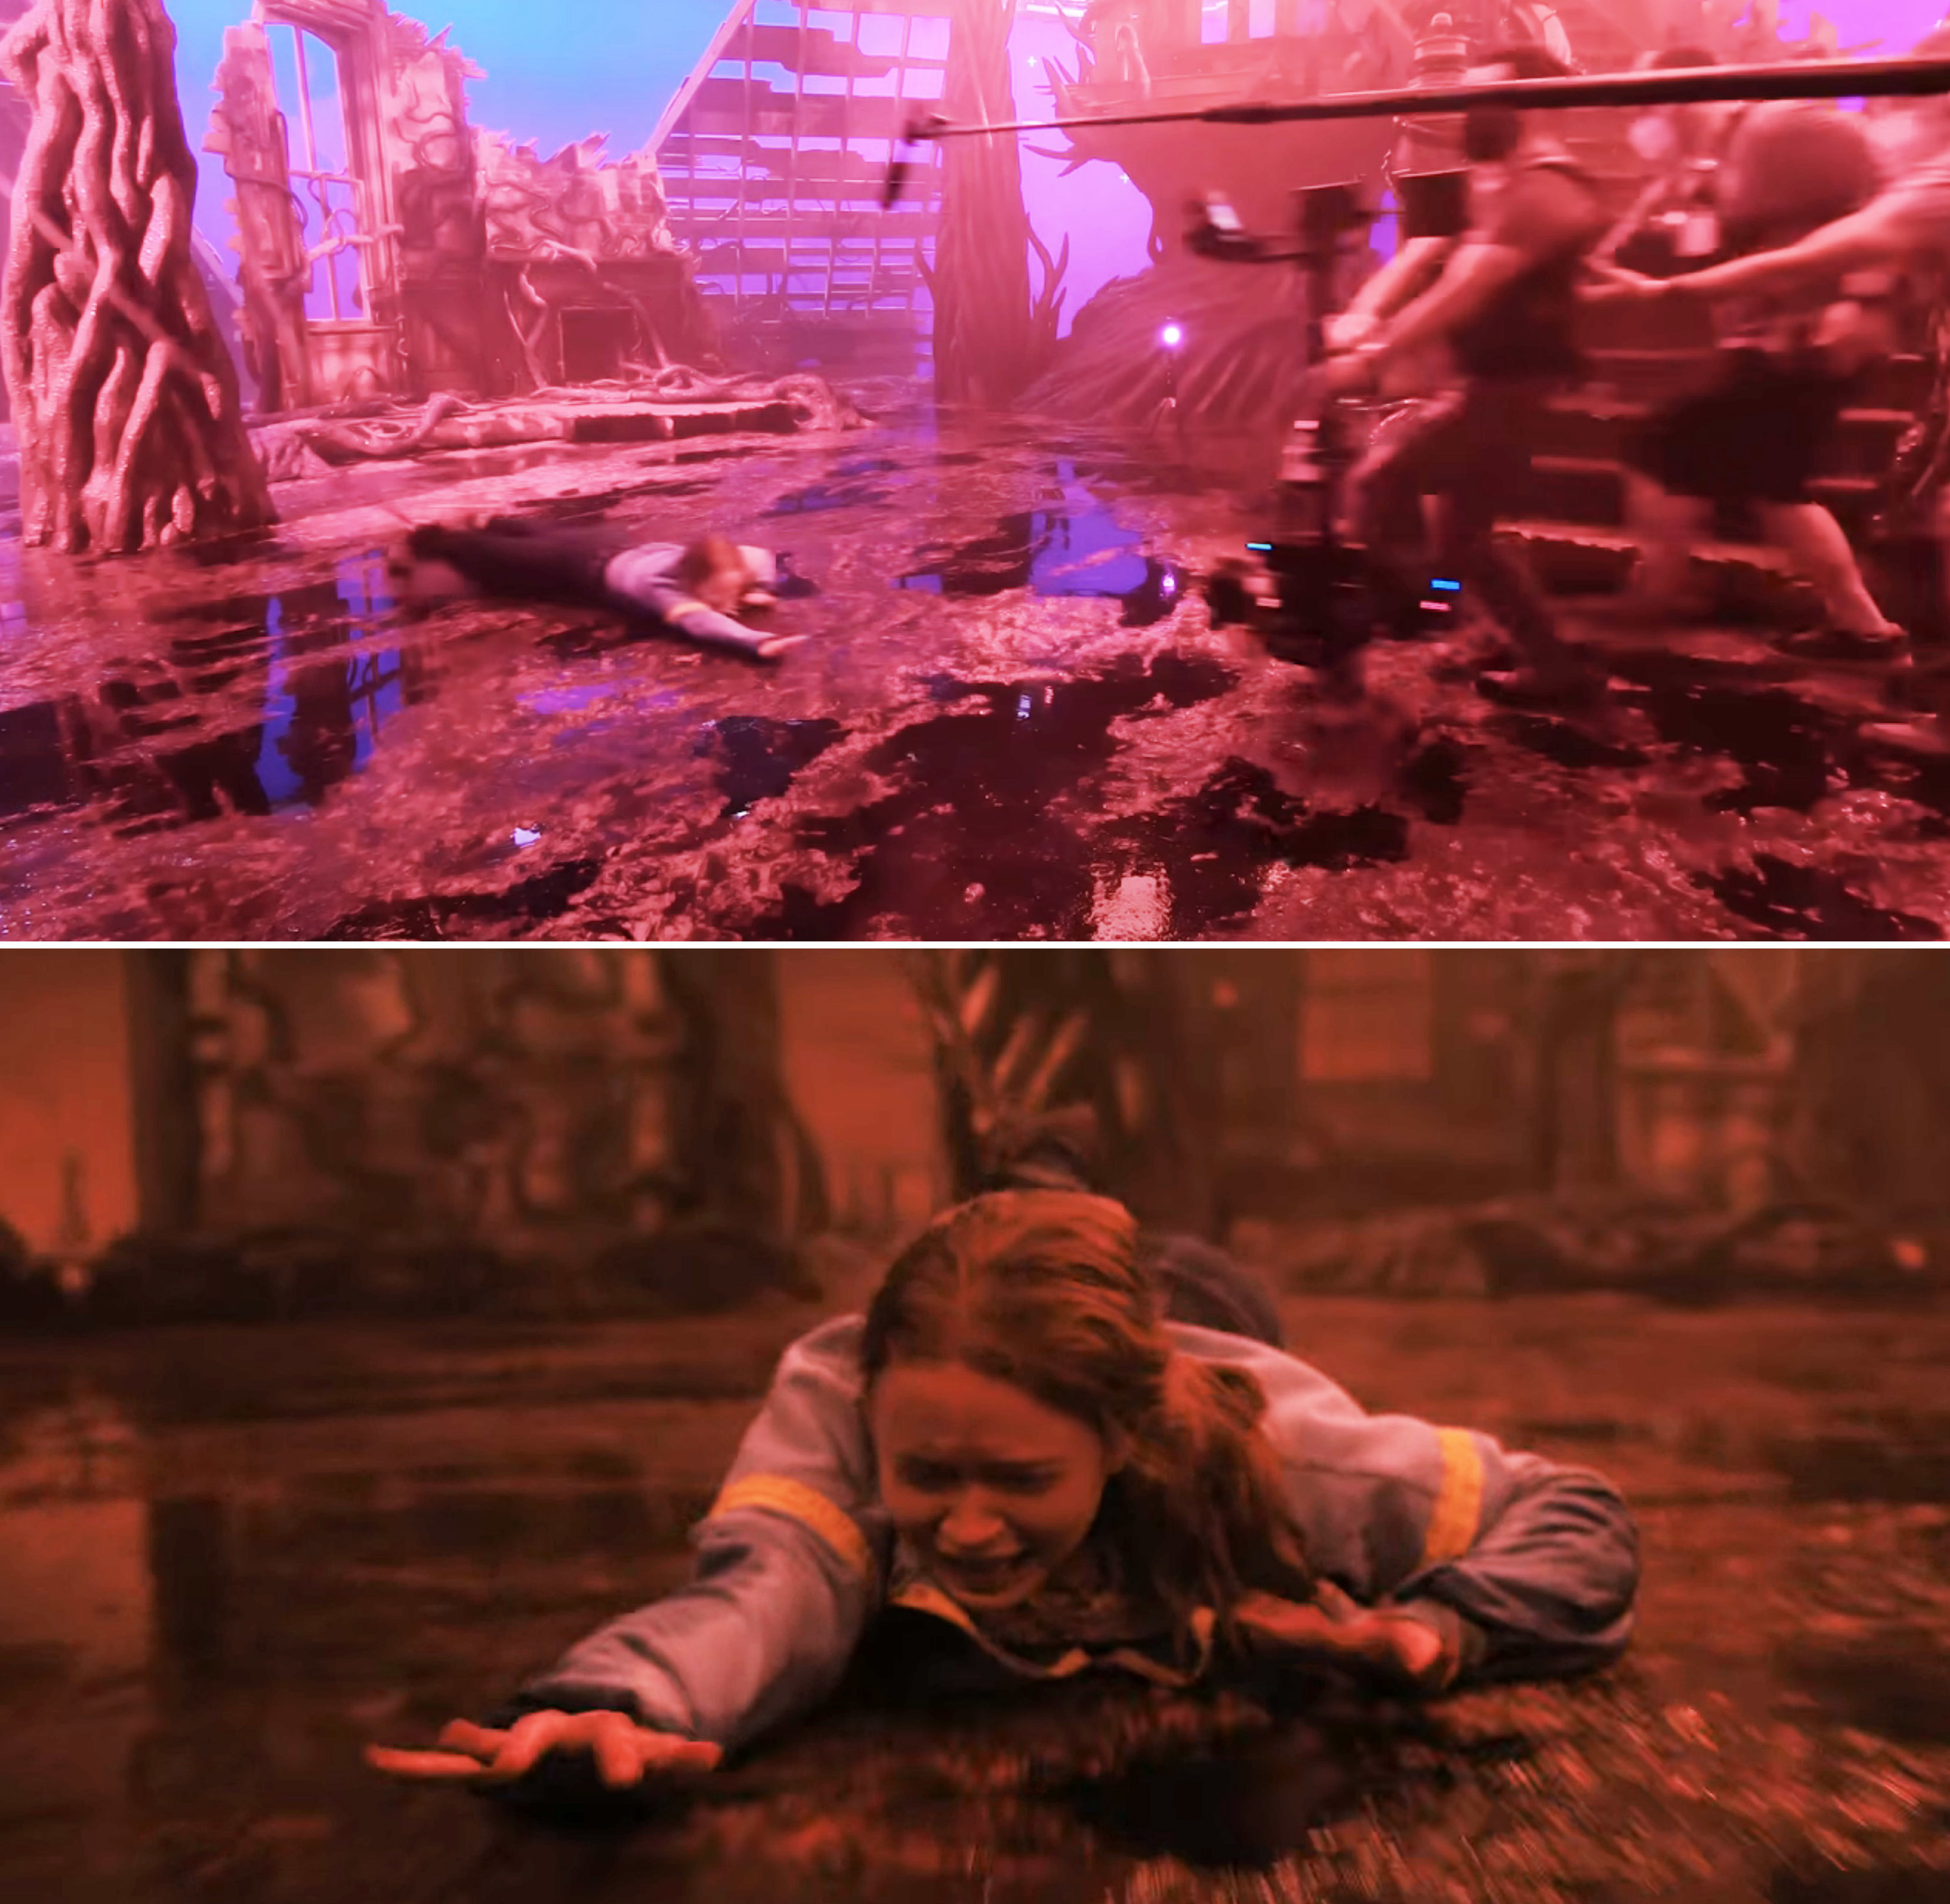 Sadie Sink being dragged by her ankle through the Upside Down